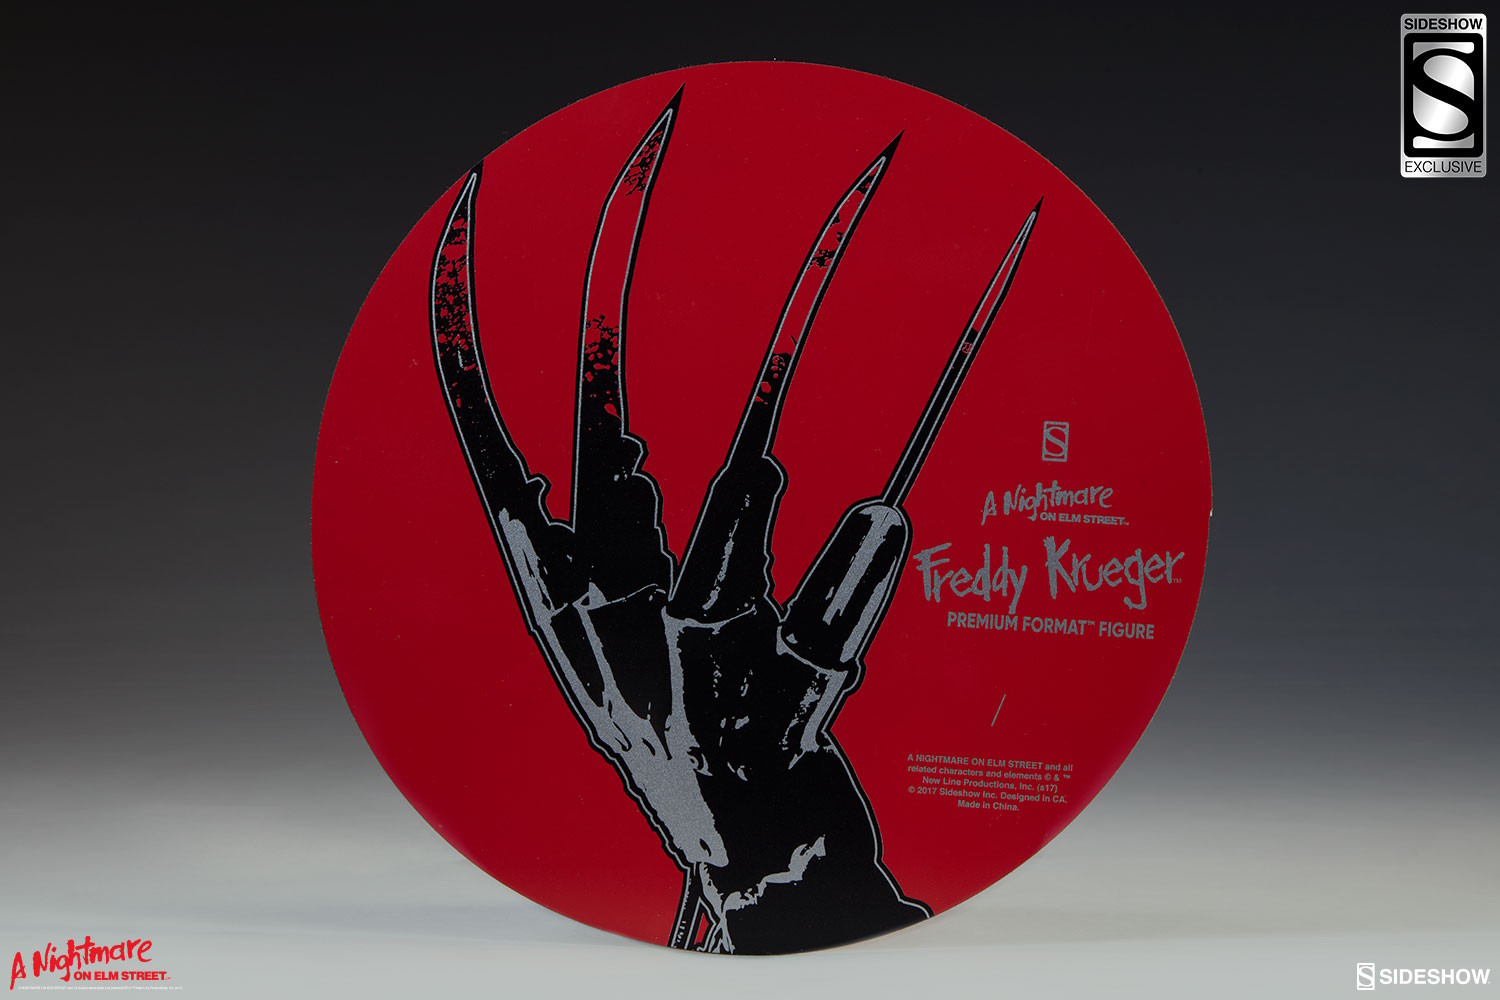 Freddy Krueger Exclusive Edition View 3